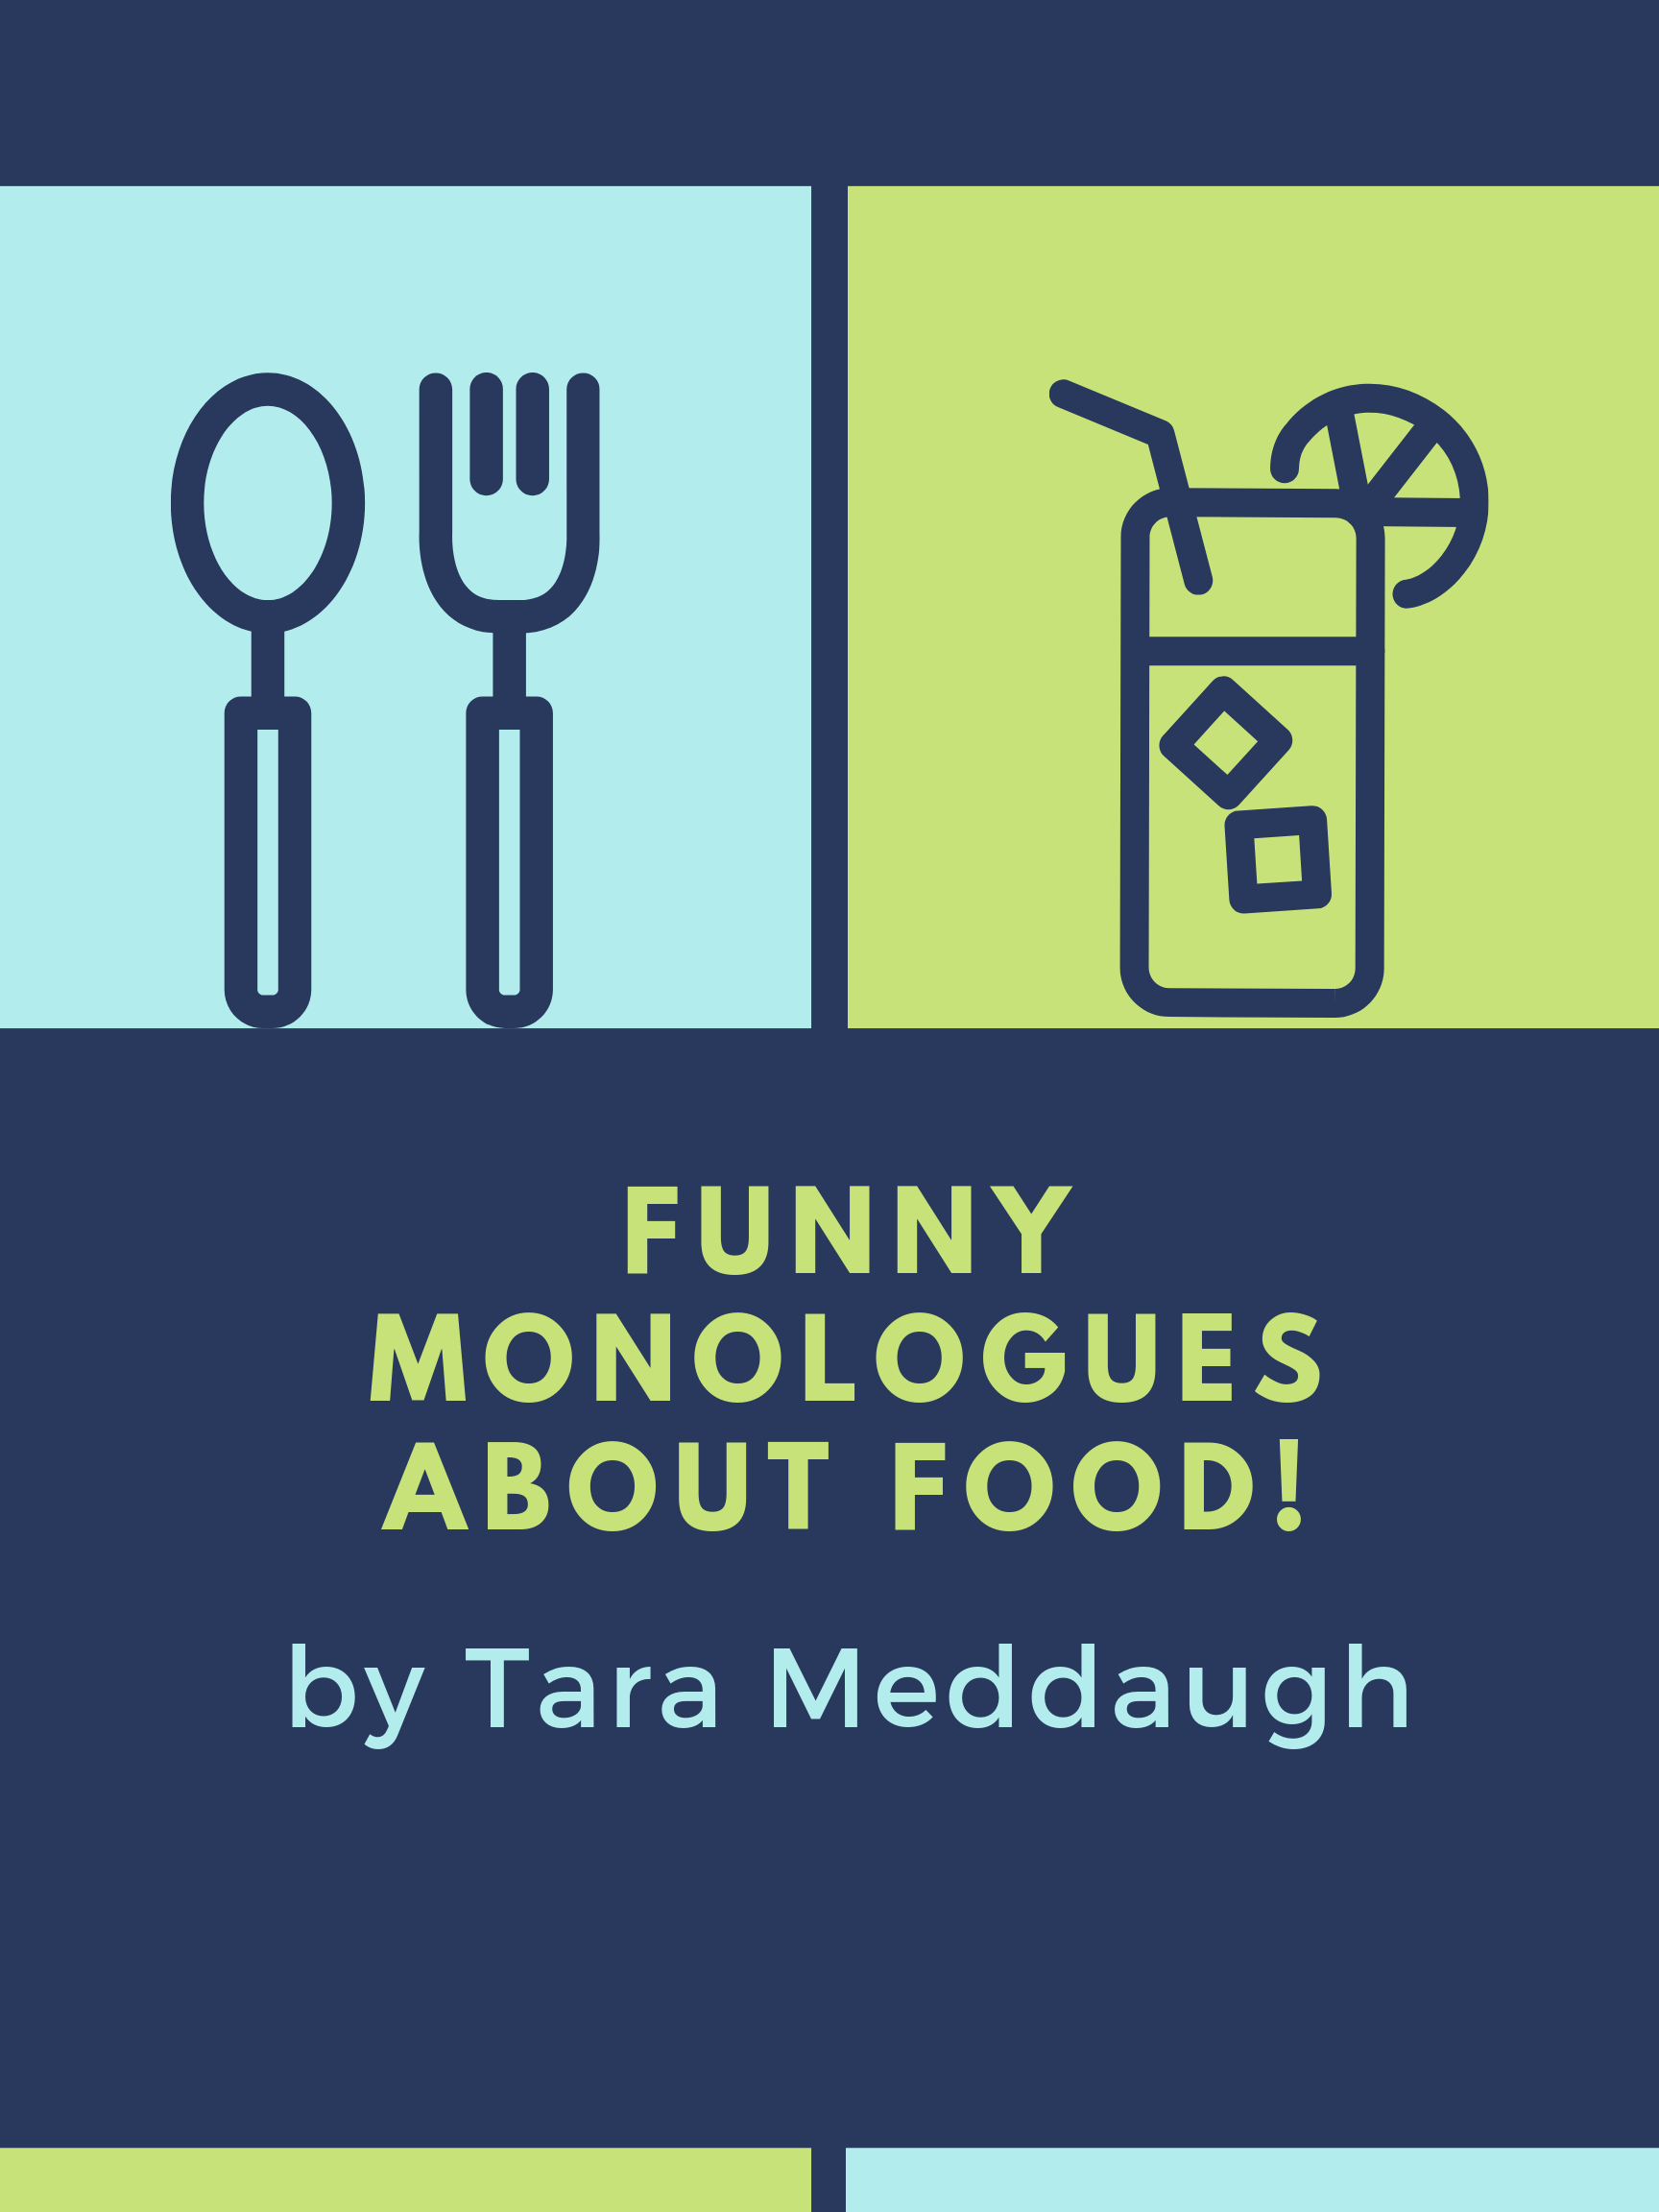 10 Funny Monologues about Food! — Tara Meddaugh